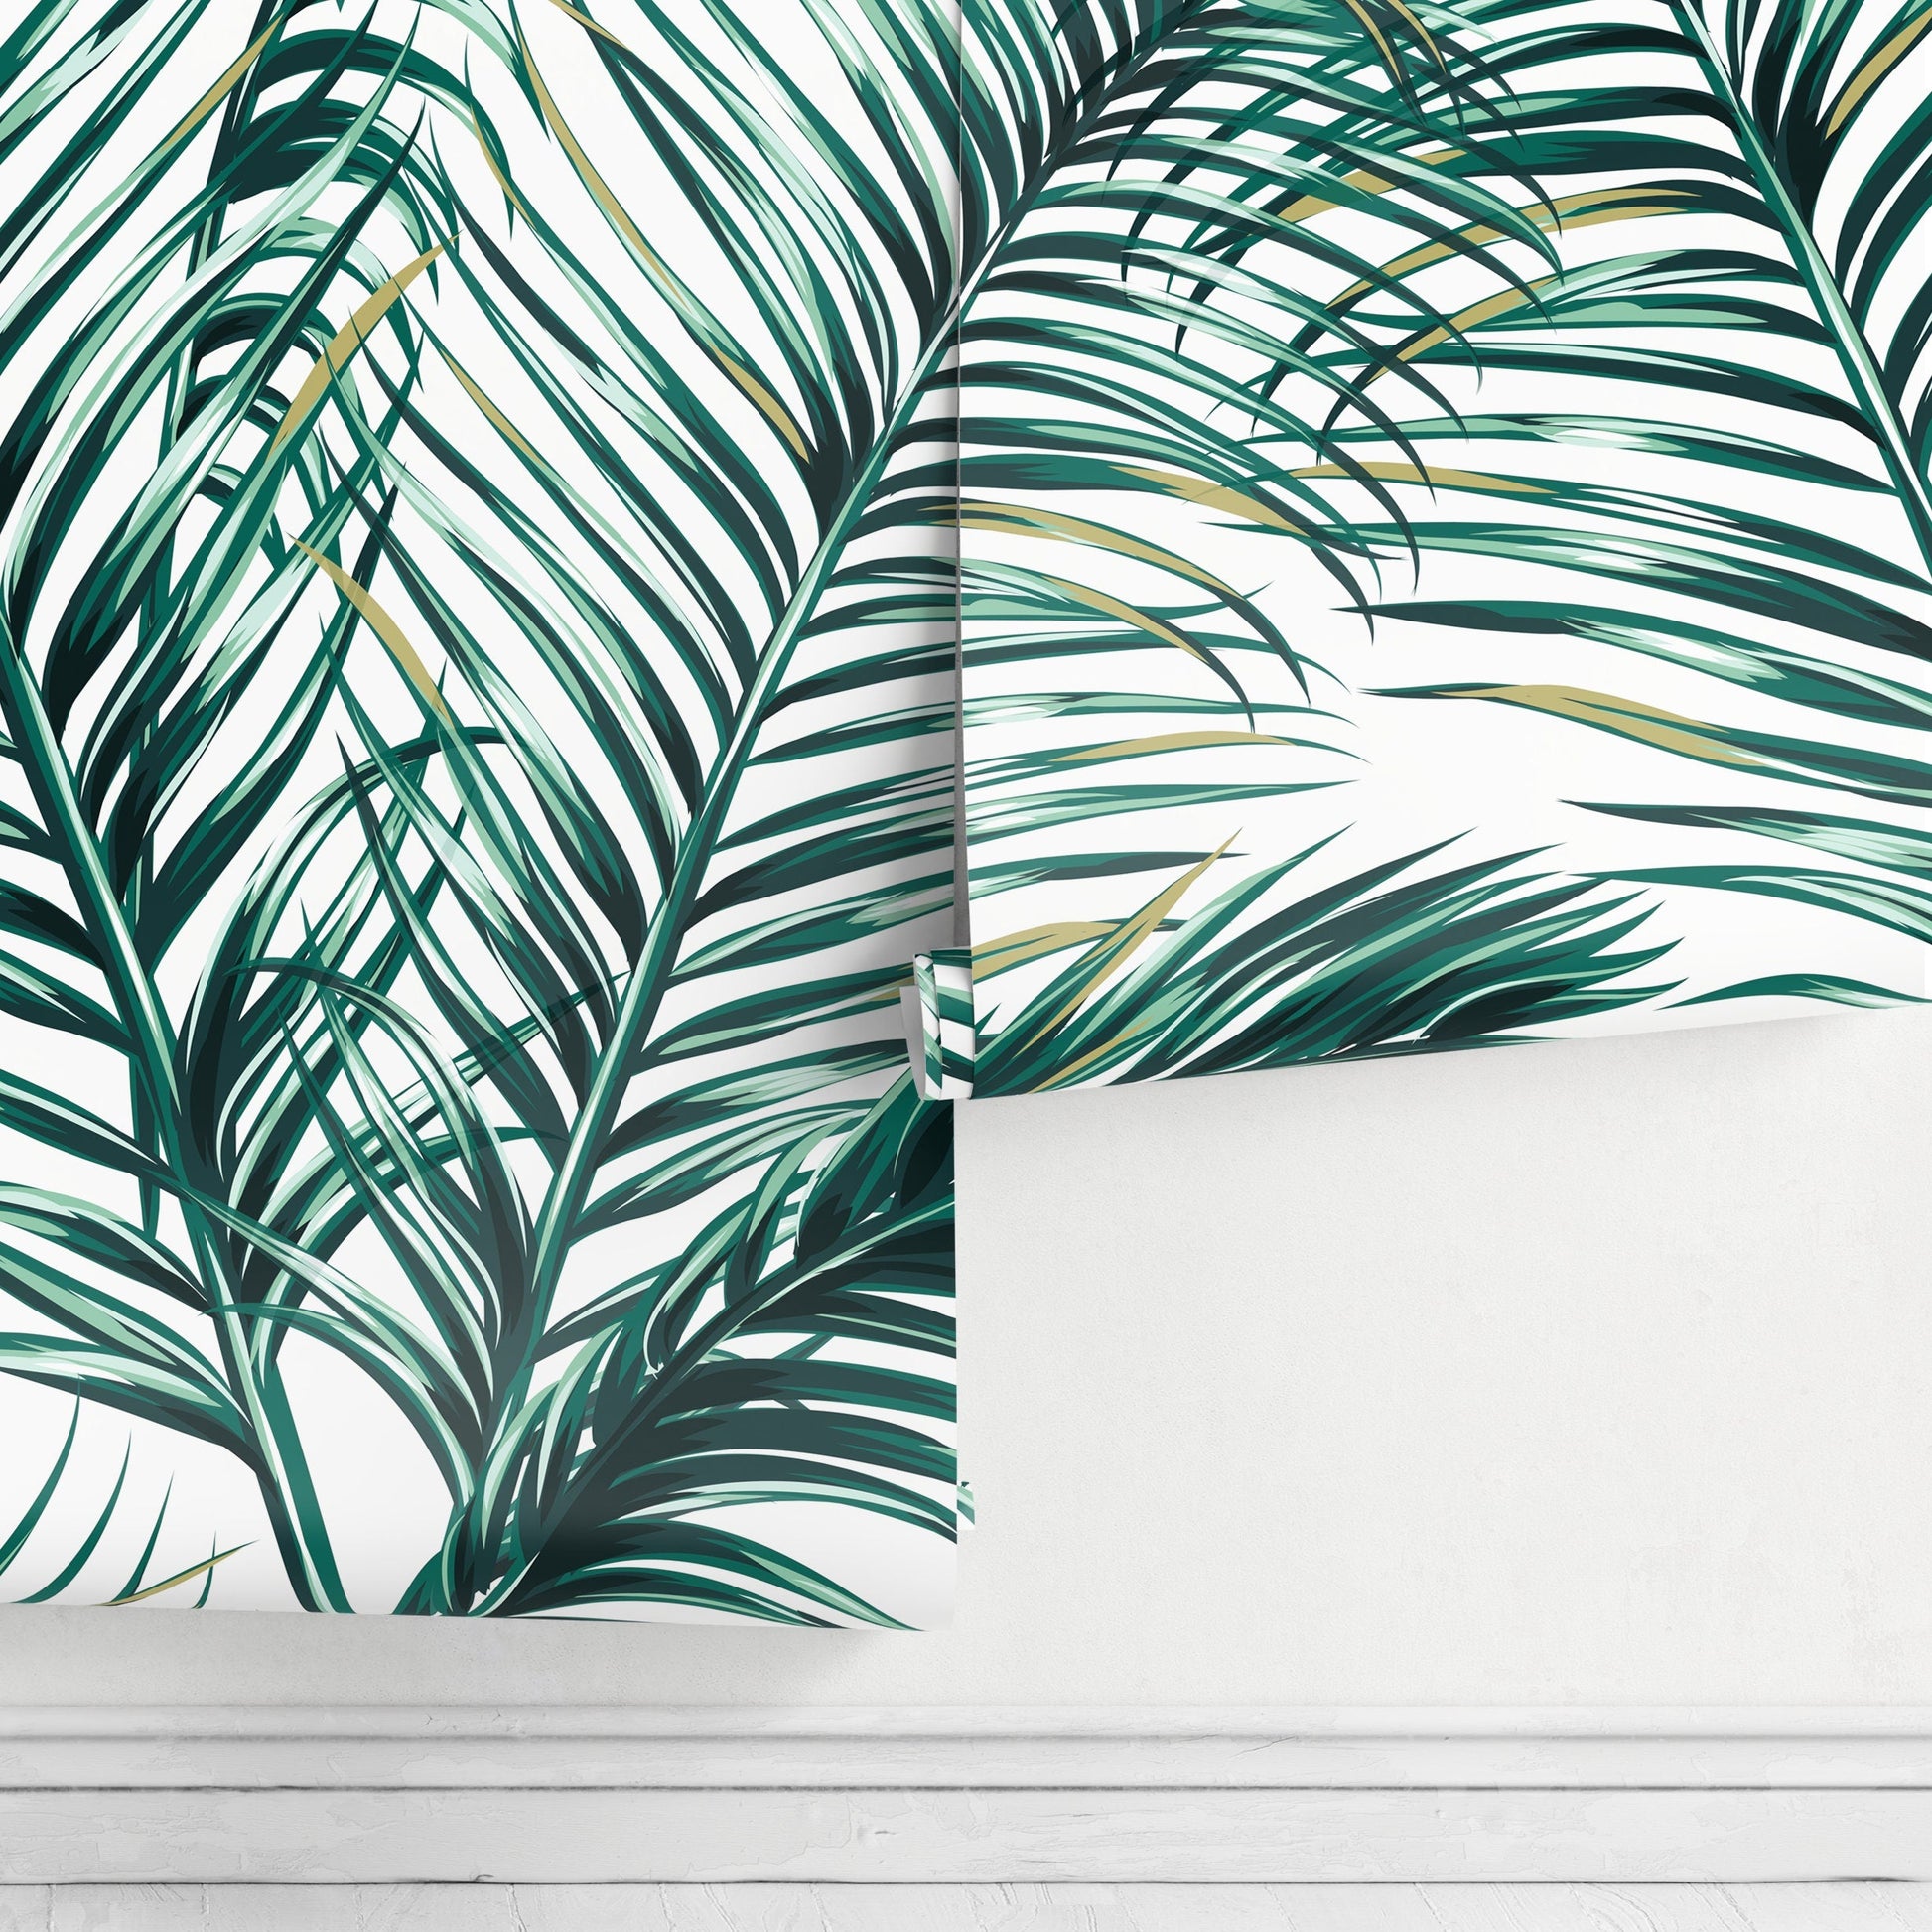 Wallpaper Peel and Stick Wallpaper Removable Wallpaper Home Decor Wall Art Wall Decor Room Decor / Tropical Leaves Palm Wallpaper - B121